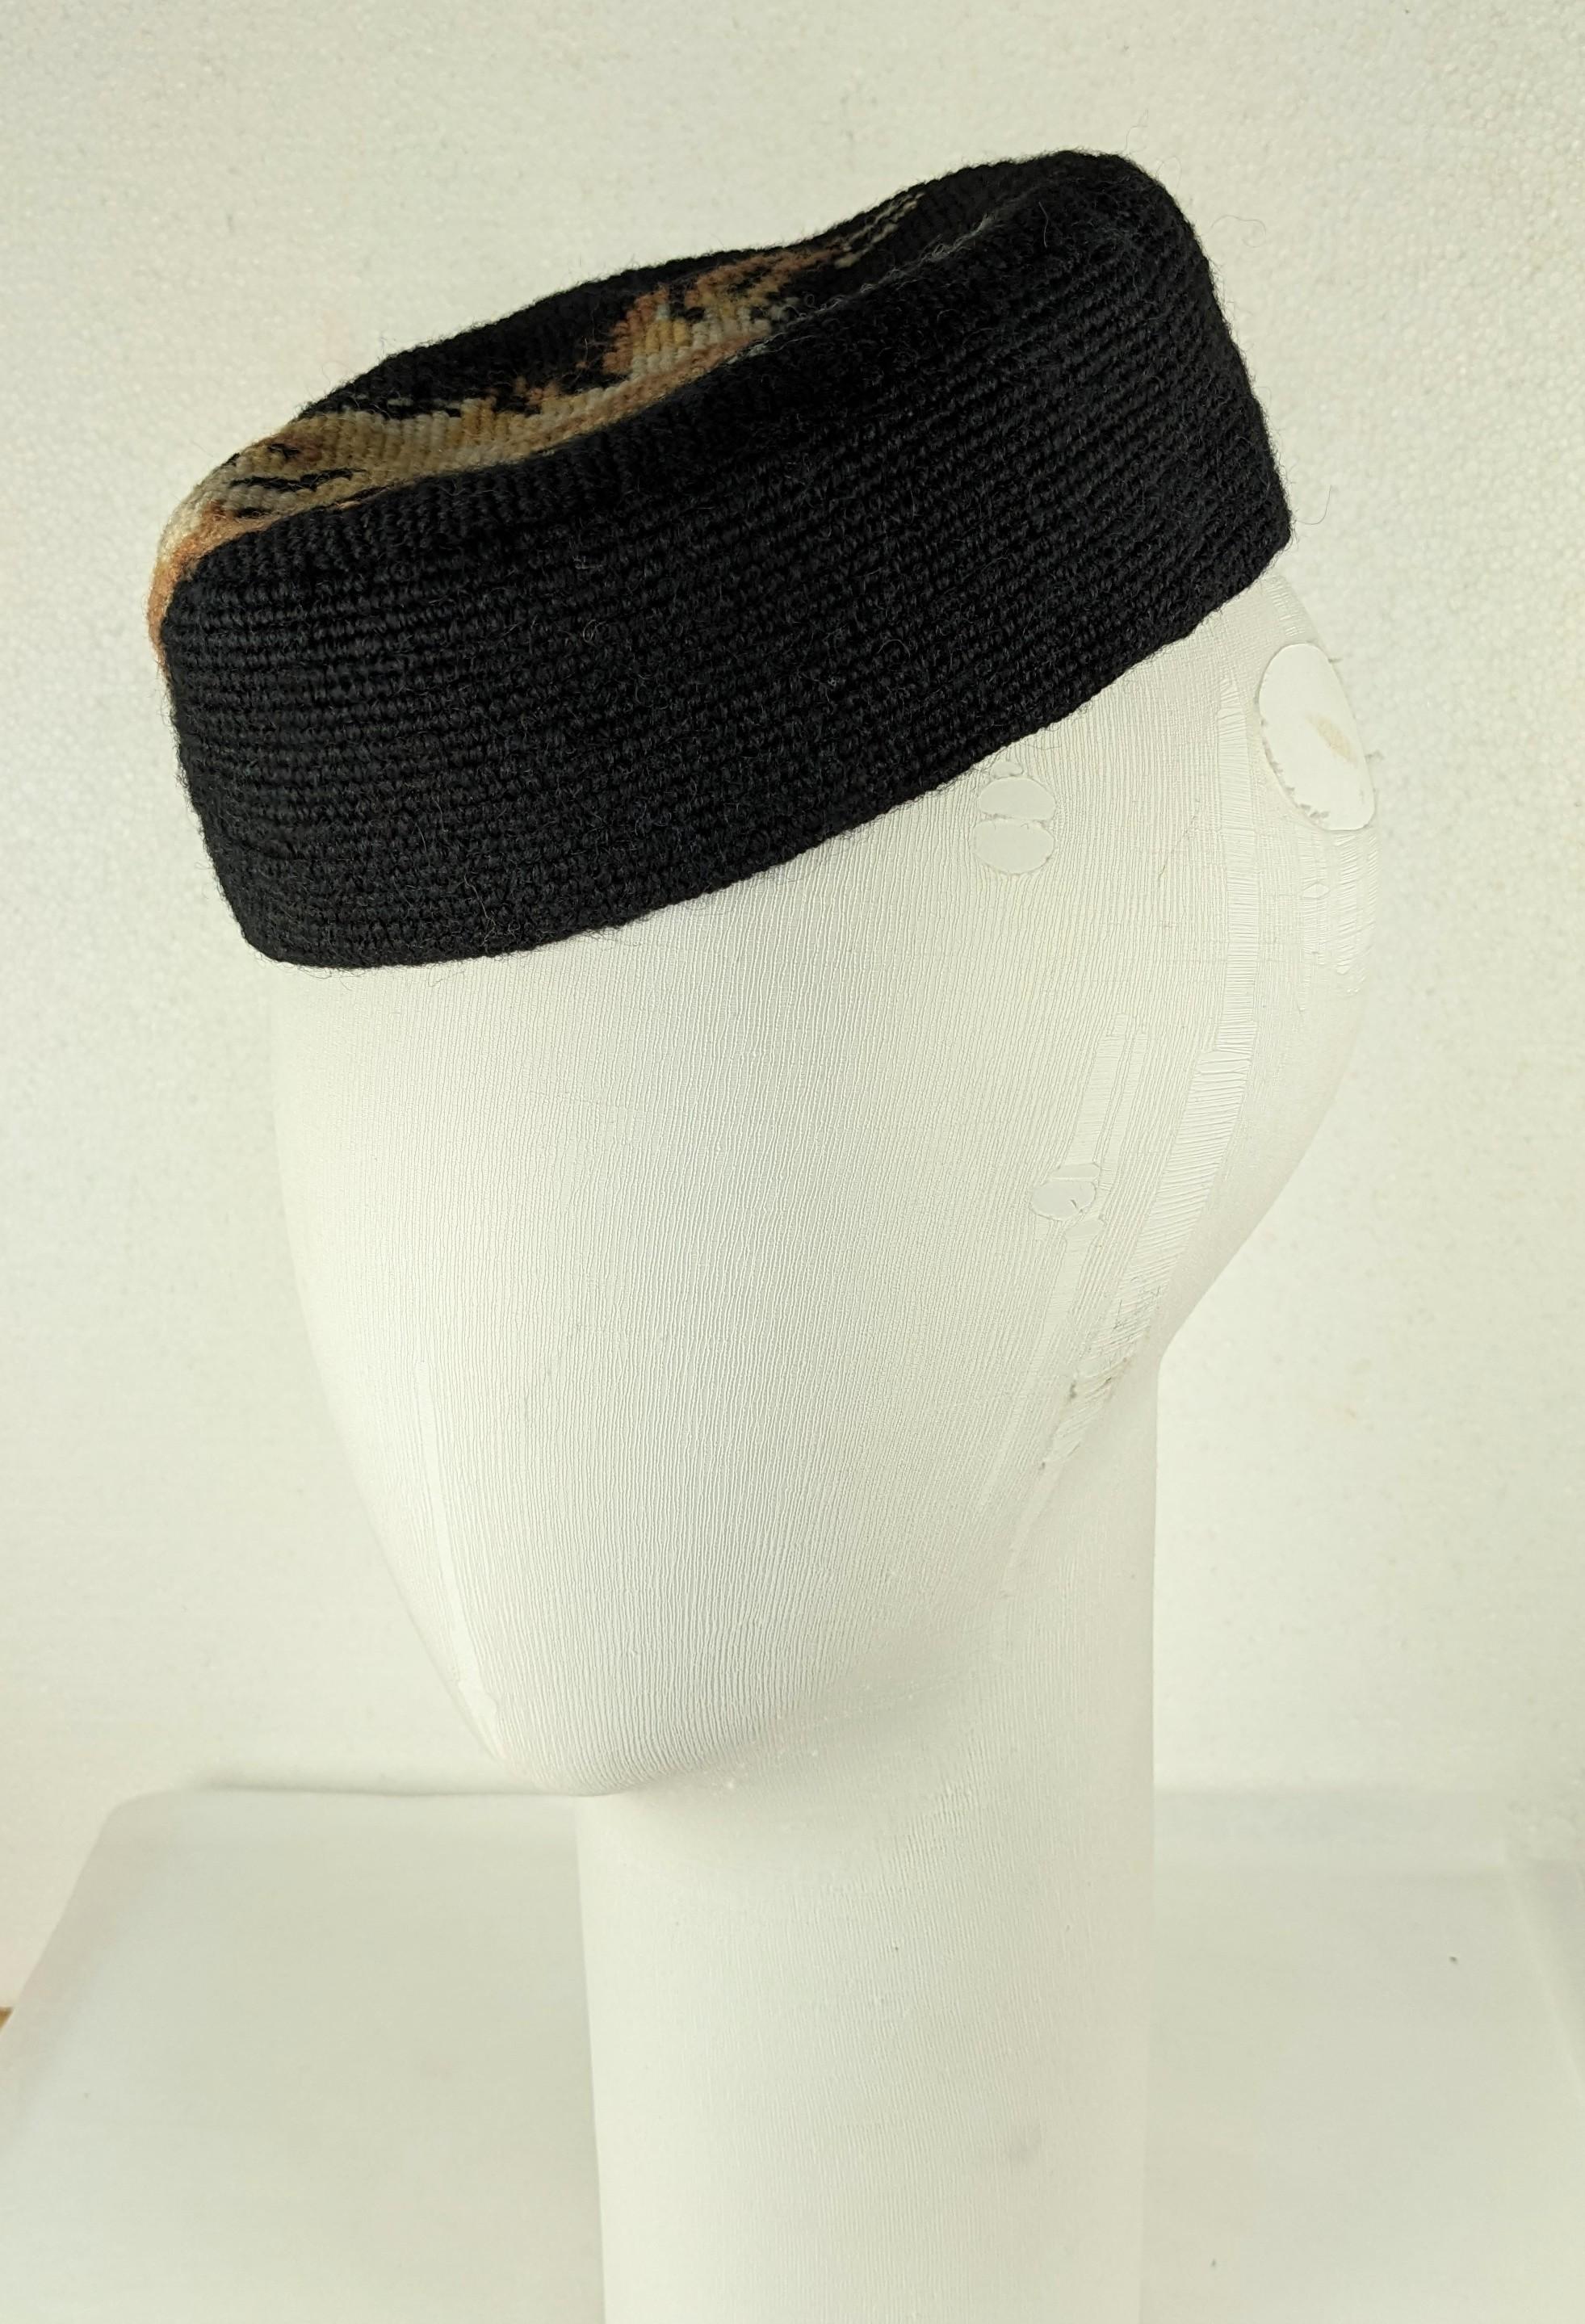 Marcel Vertes Needlepoint Cross Stitch Pill Box Hat, 1940 In Excellent Condition For Sale In New York, NY